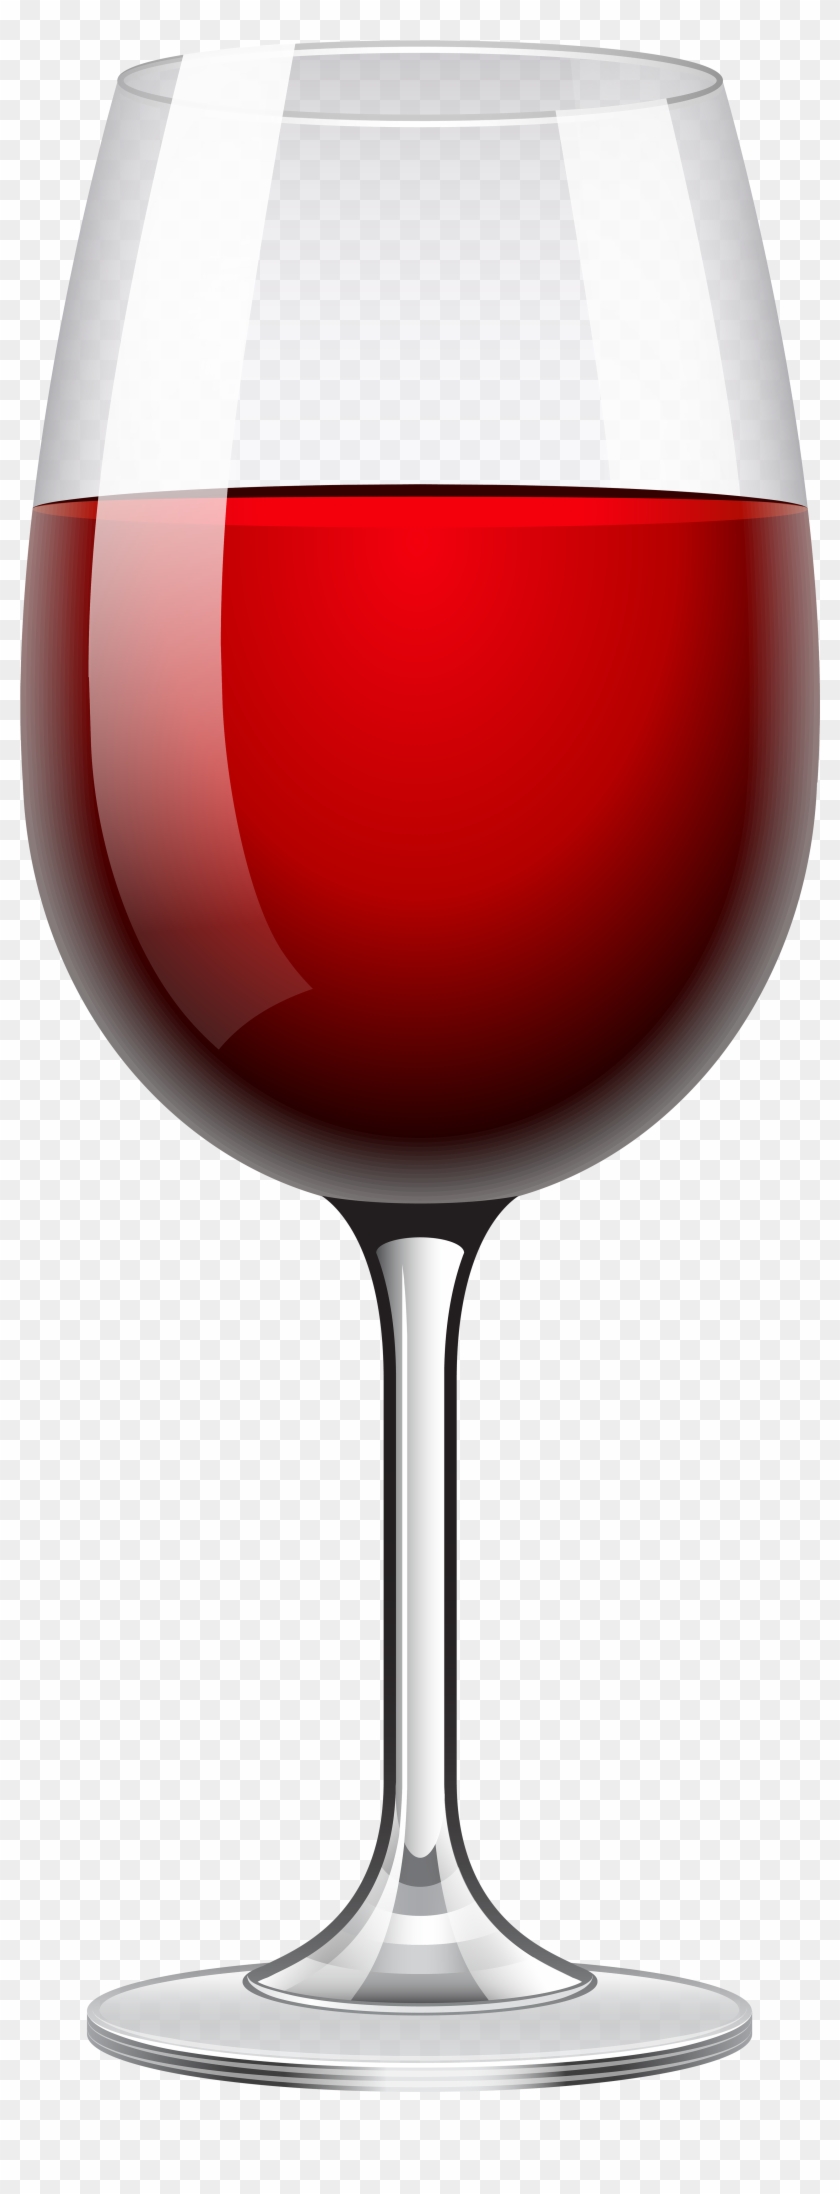 Red Wine Glass Transparent Png Clip Art Image - Red Wine Glass Png #388585